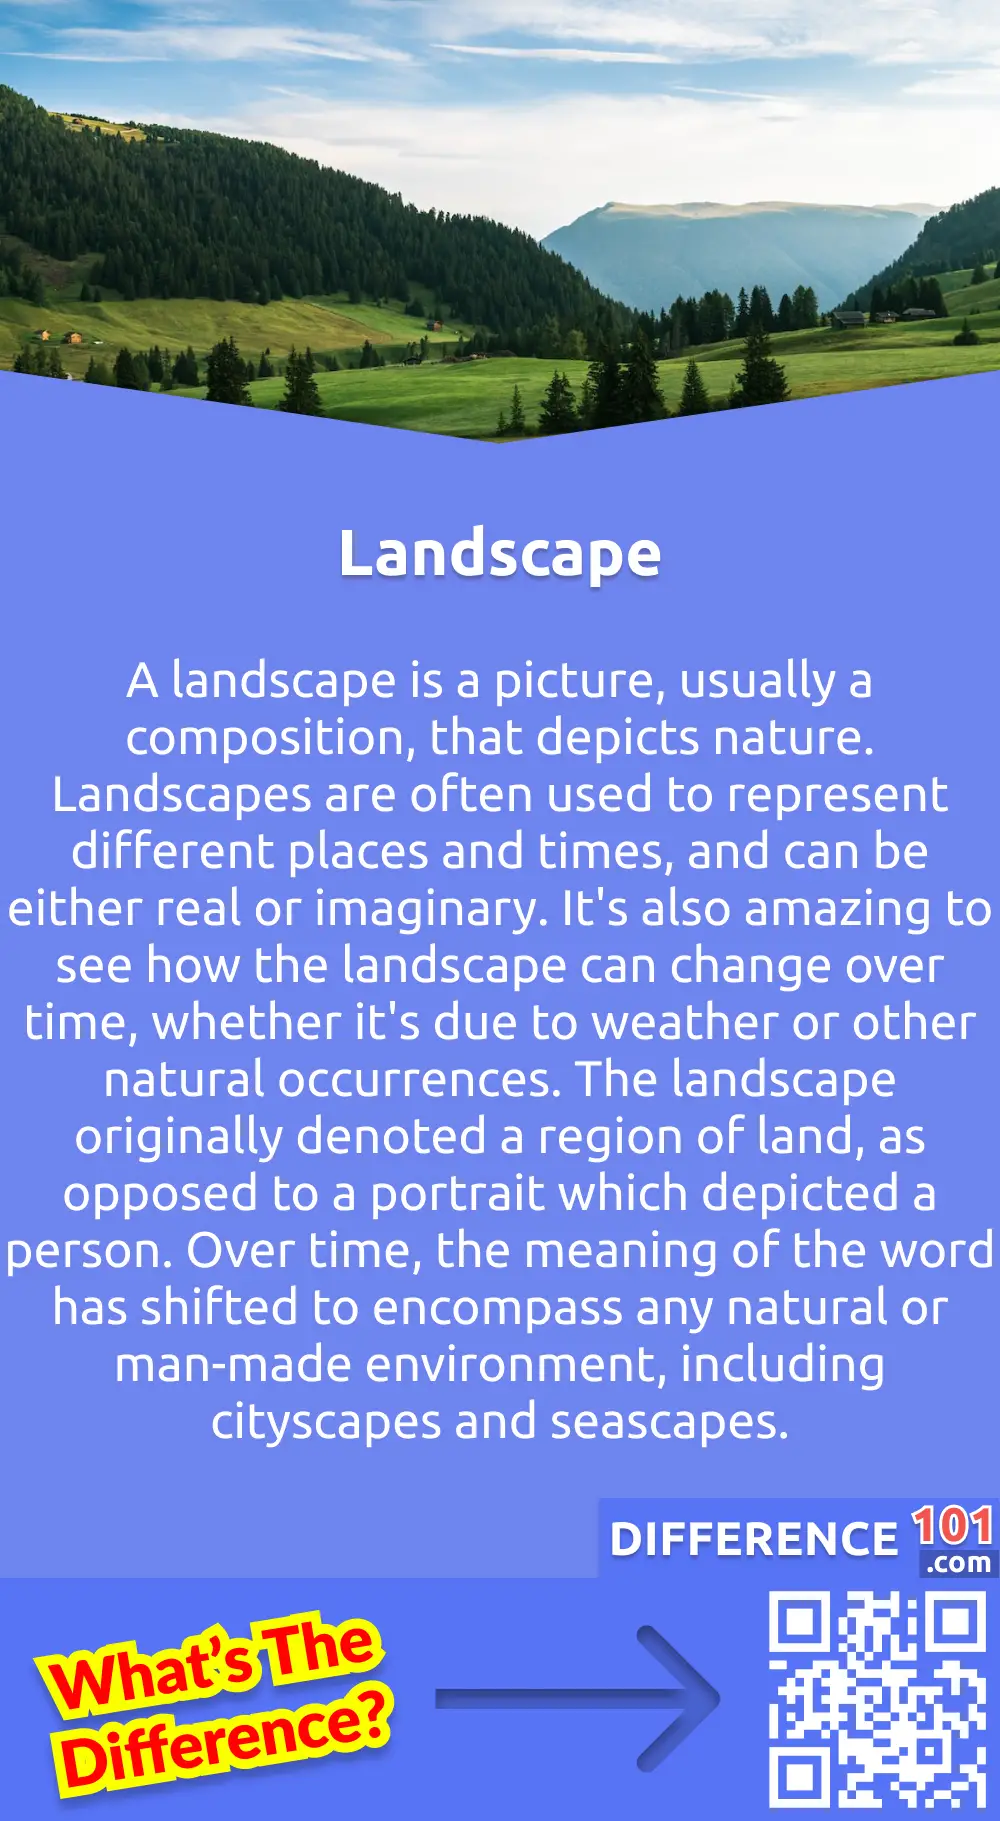 What Is Landscape? A landscape is a picture, usually a composition, that depicts nature. Landscapes are often used to represent different places and times, and can be either real or imaginary. It's also amazing to see how the landscape can change over time, whether it's due to weather or other natural occurrences. The landscape originally denoted a region of land, as opposed to a portrait which depicted a person. Over time, the meaning of the word has shifted to encompass any natural or man-made environment, including cityscapes and seascapes.  Landscapes can be captured in any medium, from painting and photography to film and video. Whether it's a sweeping vista of the Grand Canyon or a small garden in your backyard, the landscape is a source of endless inspiration.  